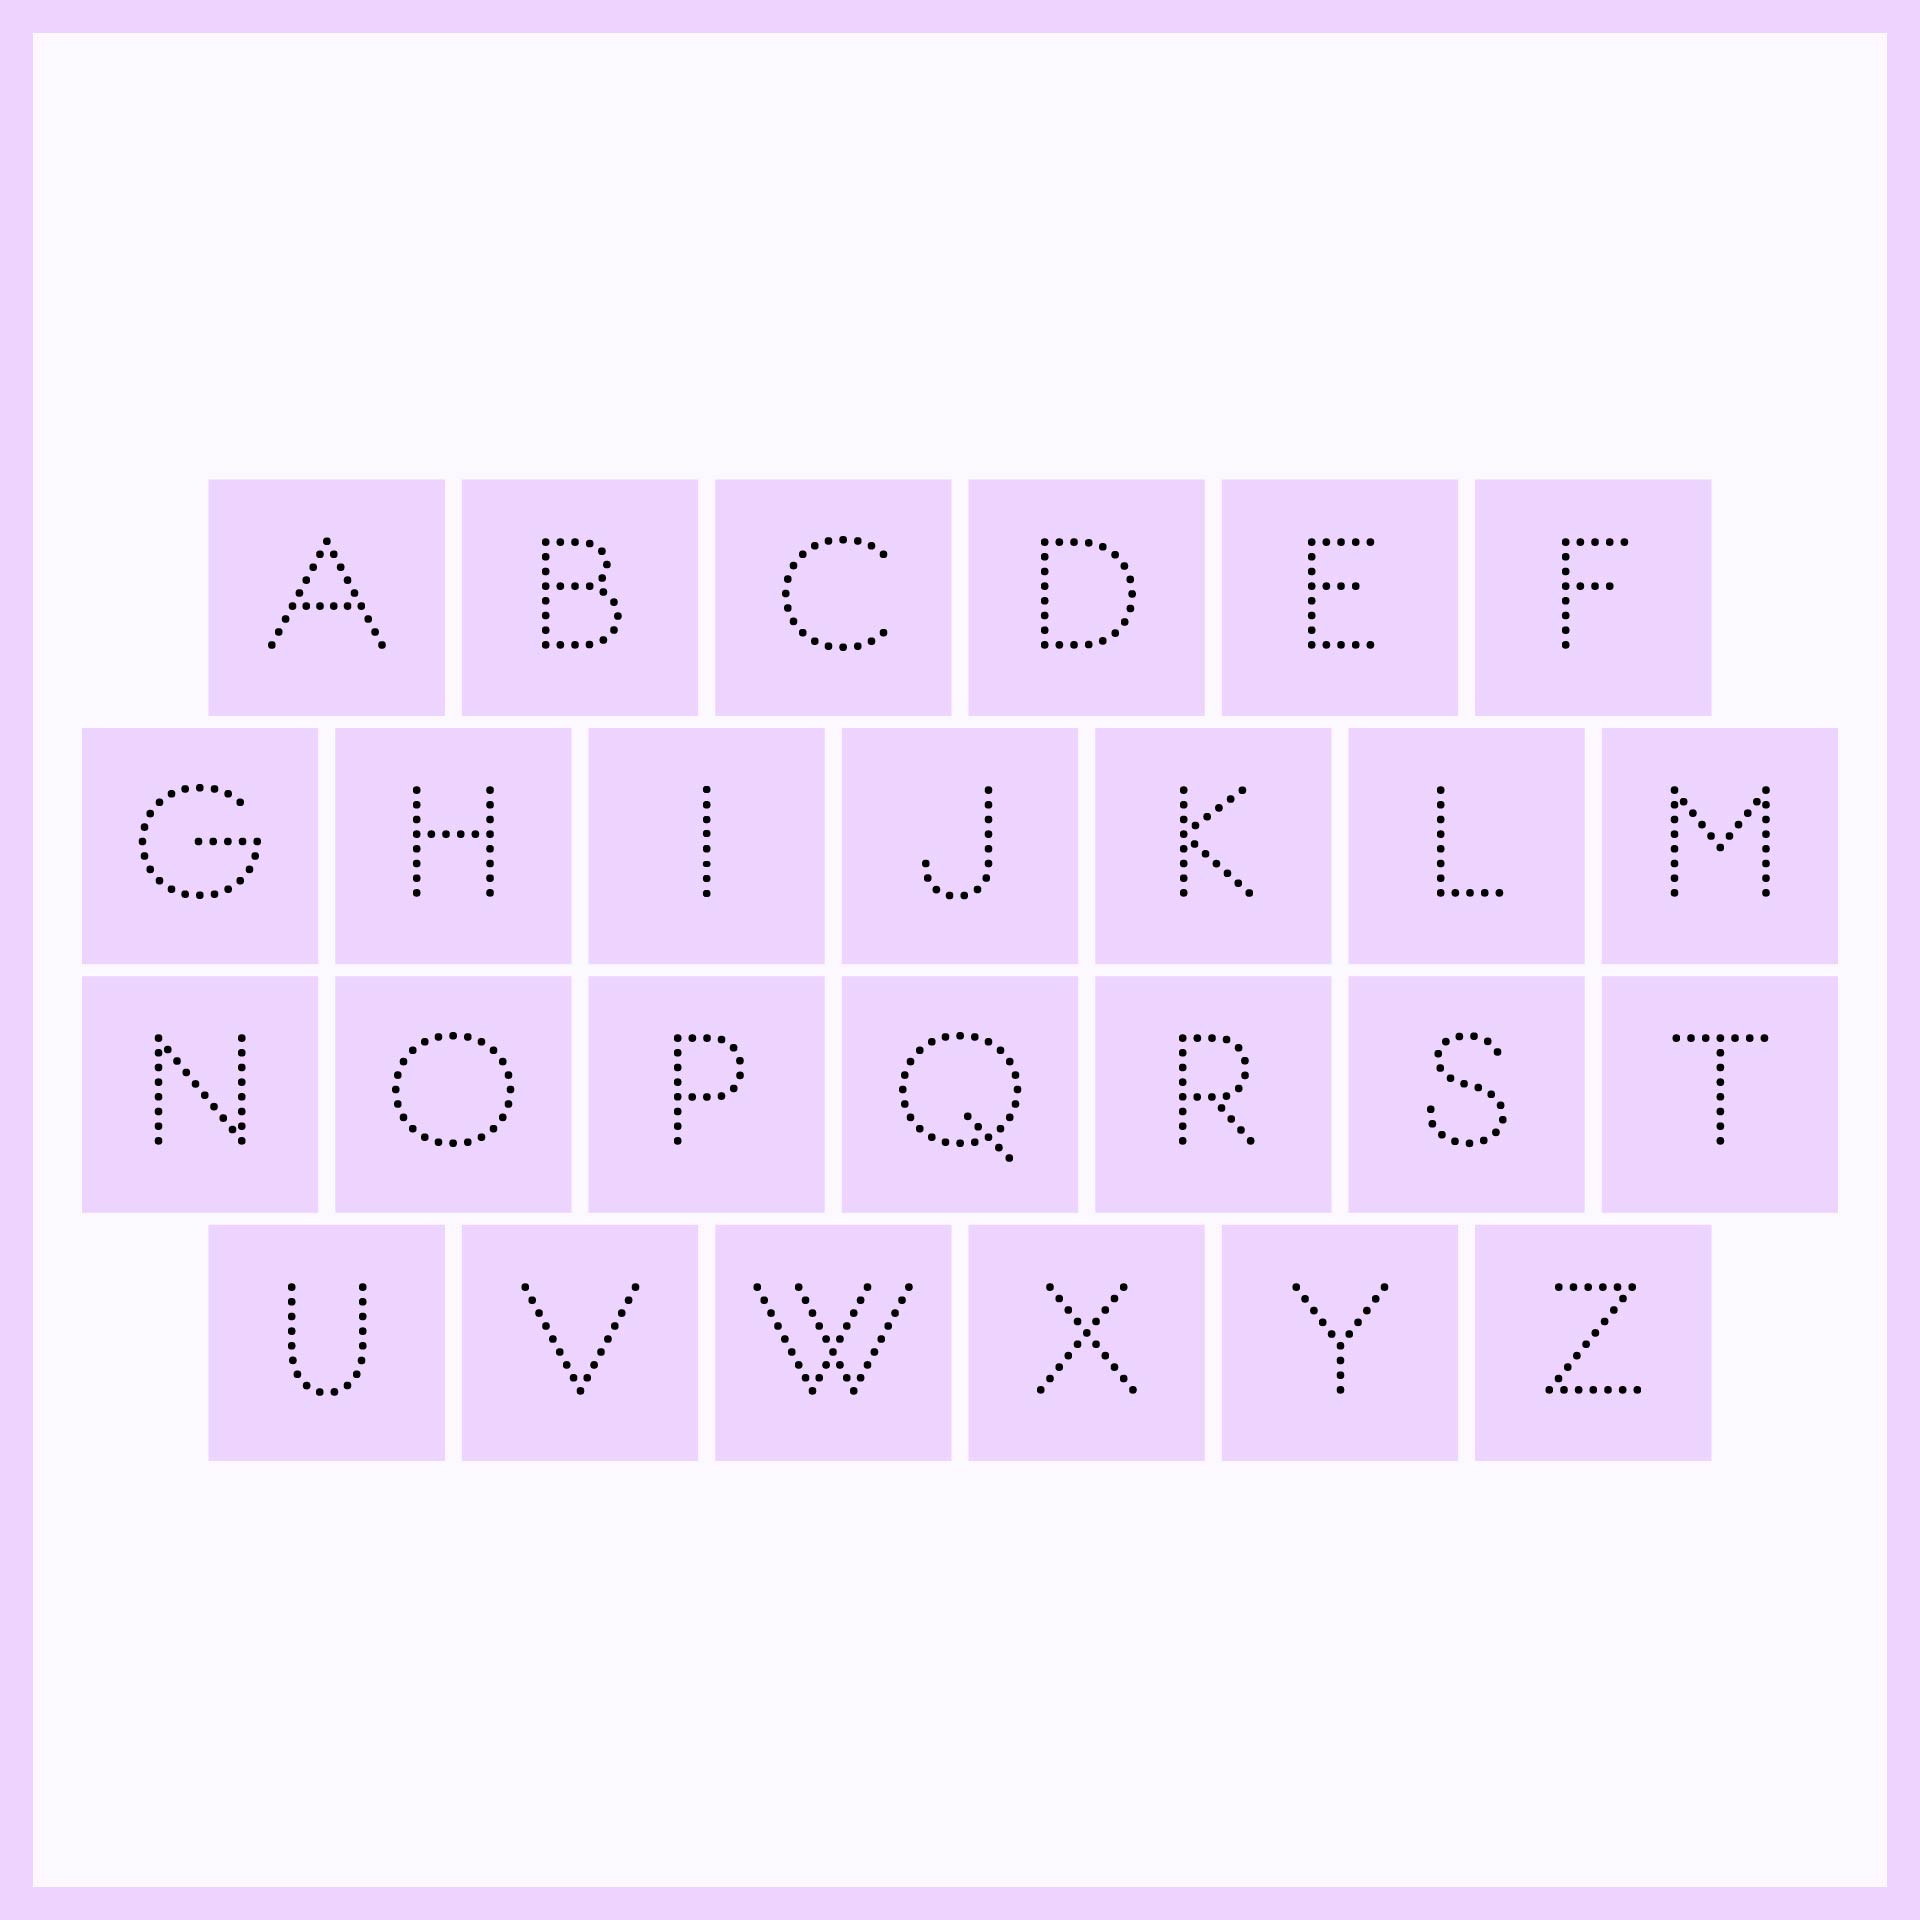 7-best-images-of-free-printable-tracing-alphabet-letters-free